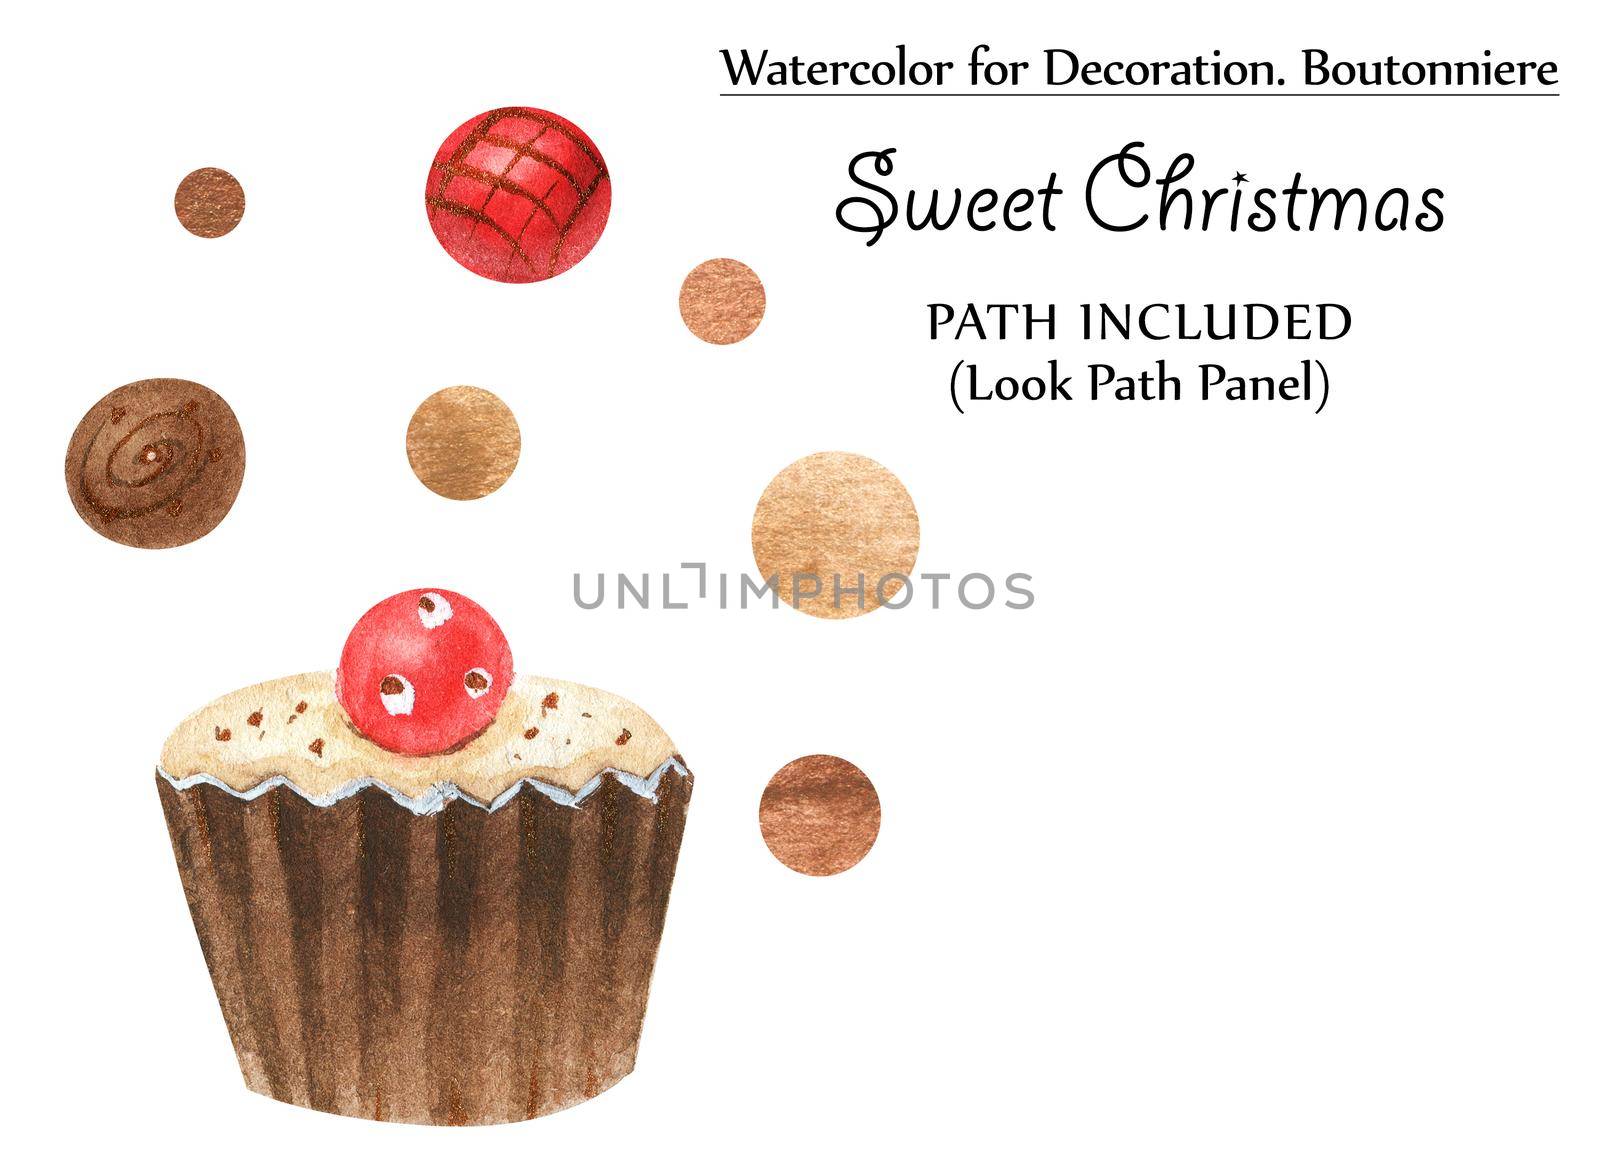 Sweet watercolor vignettes with gingerbreads and chocolates by Xeniasnowstorm